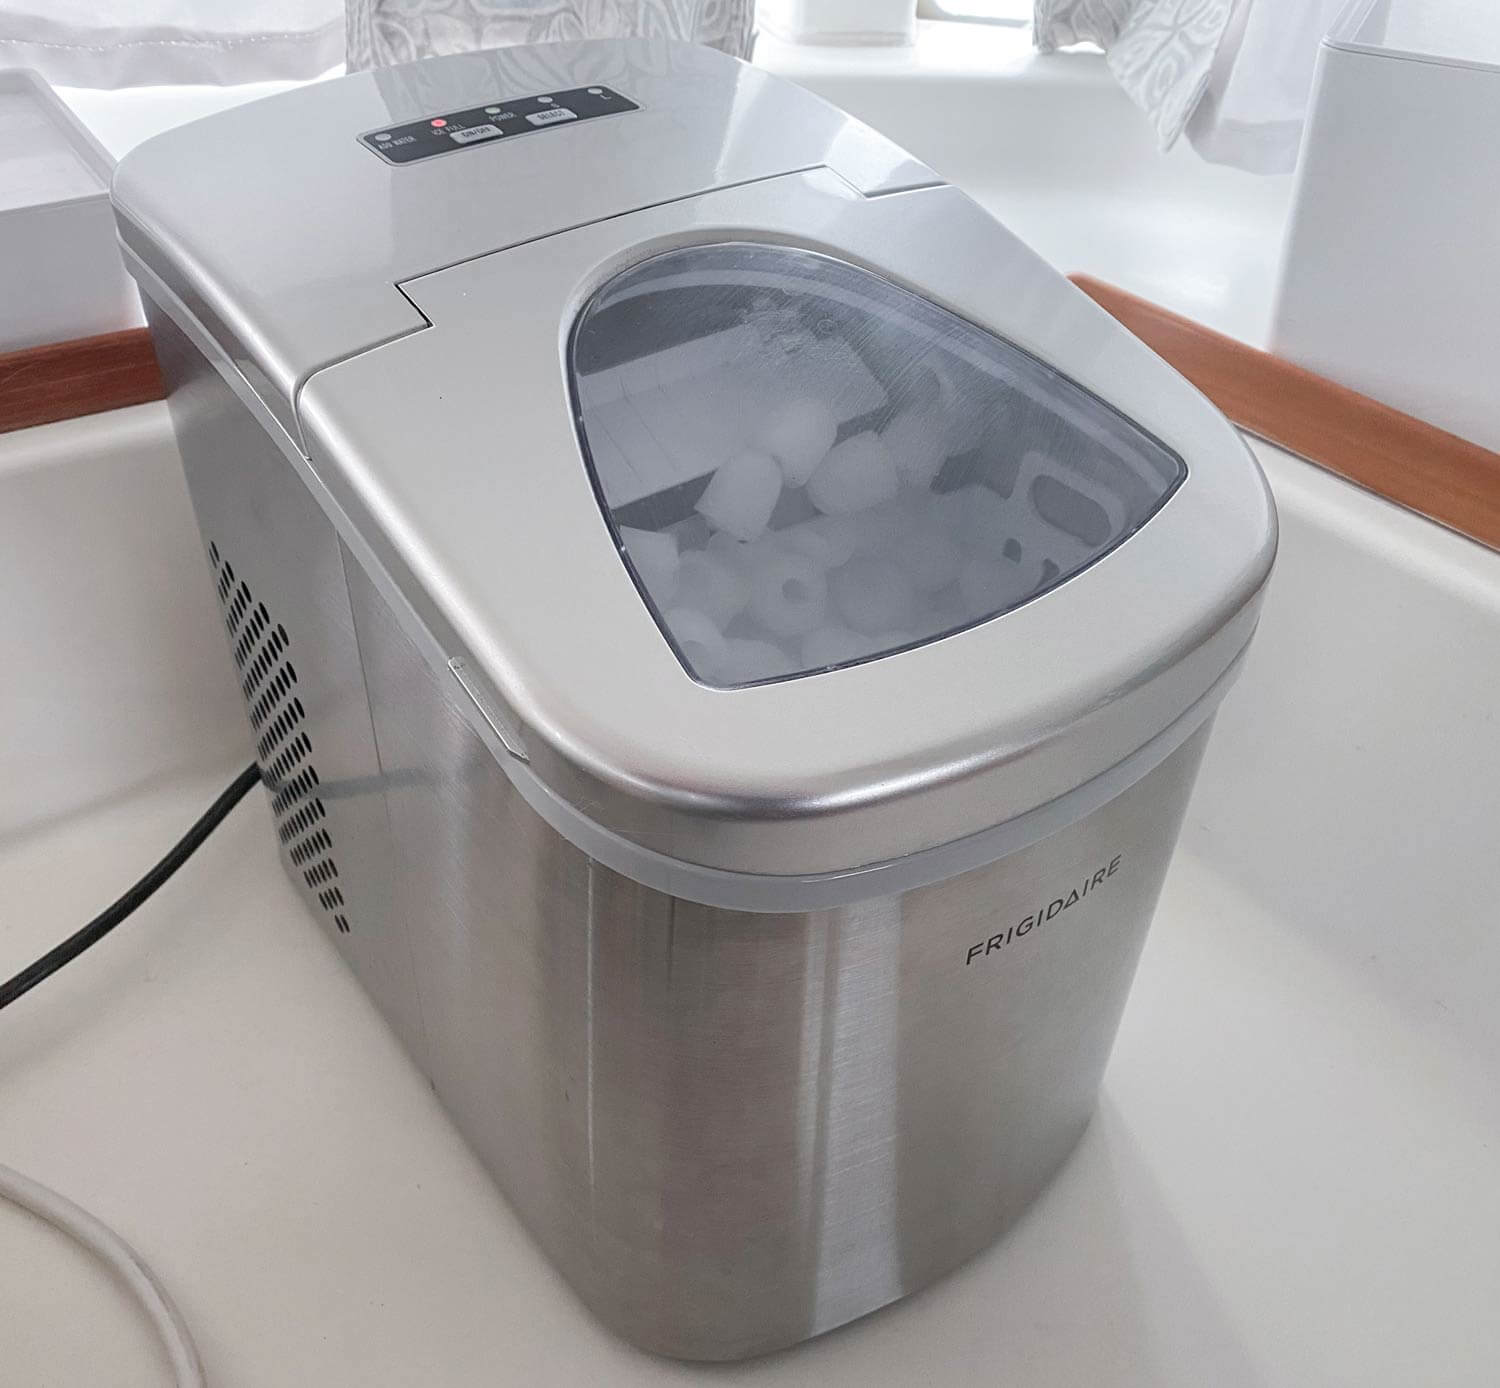 ice maker sitting on galley counter